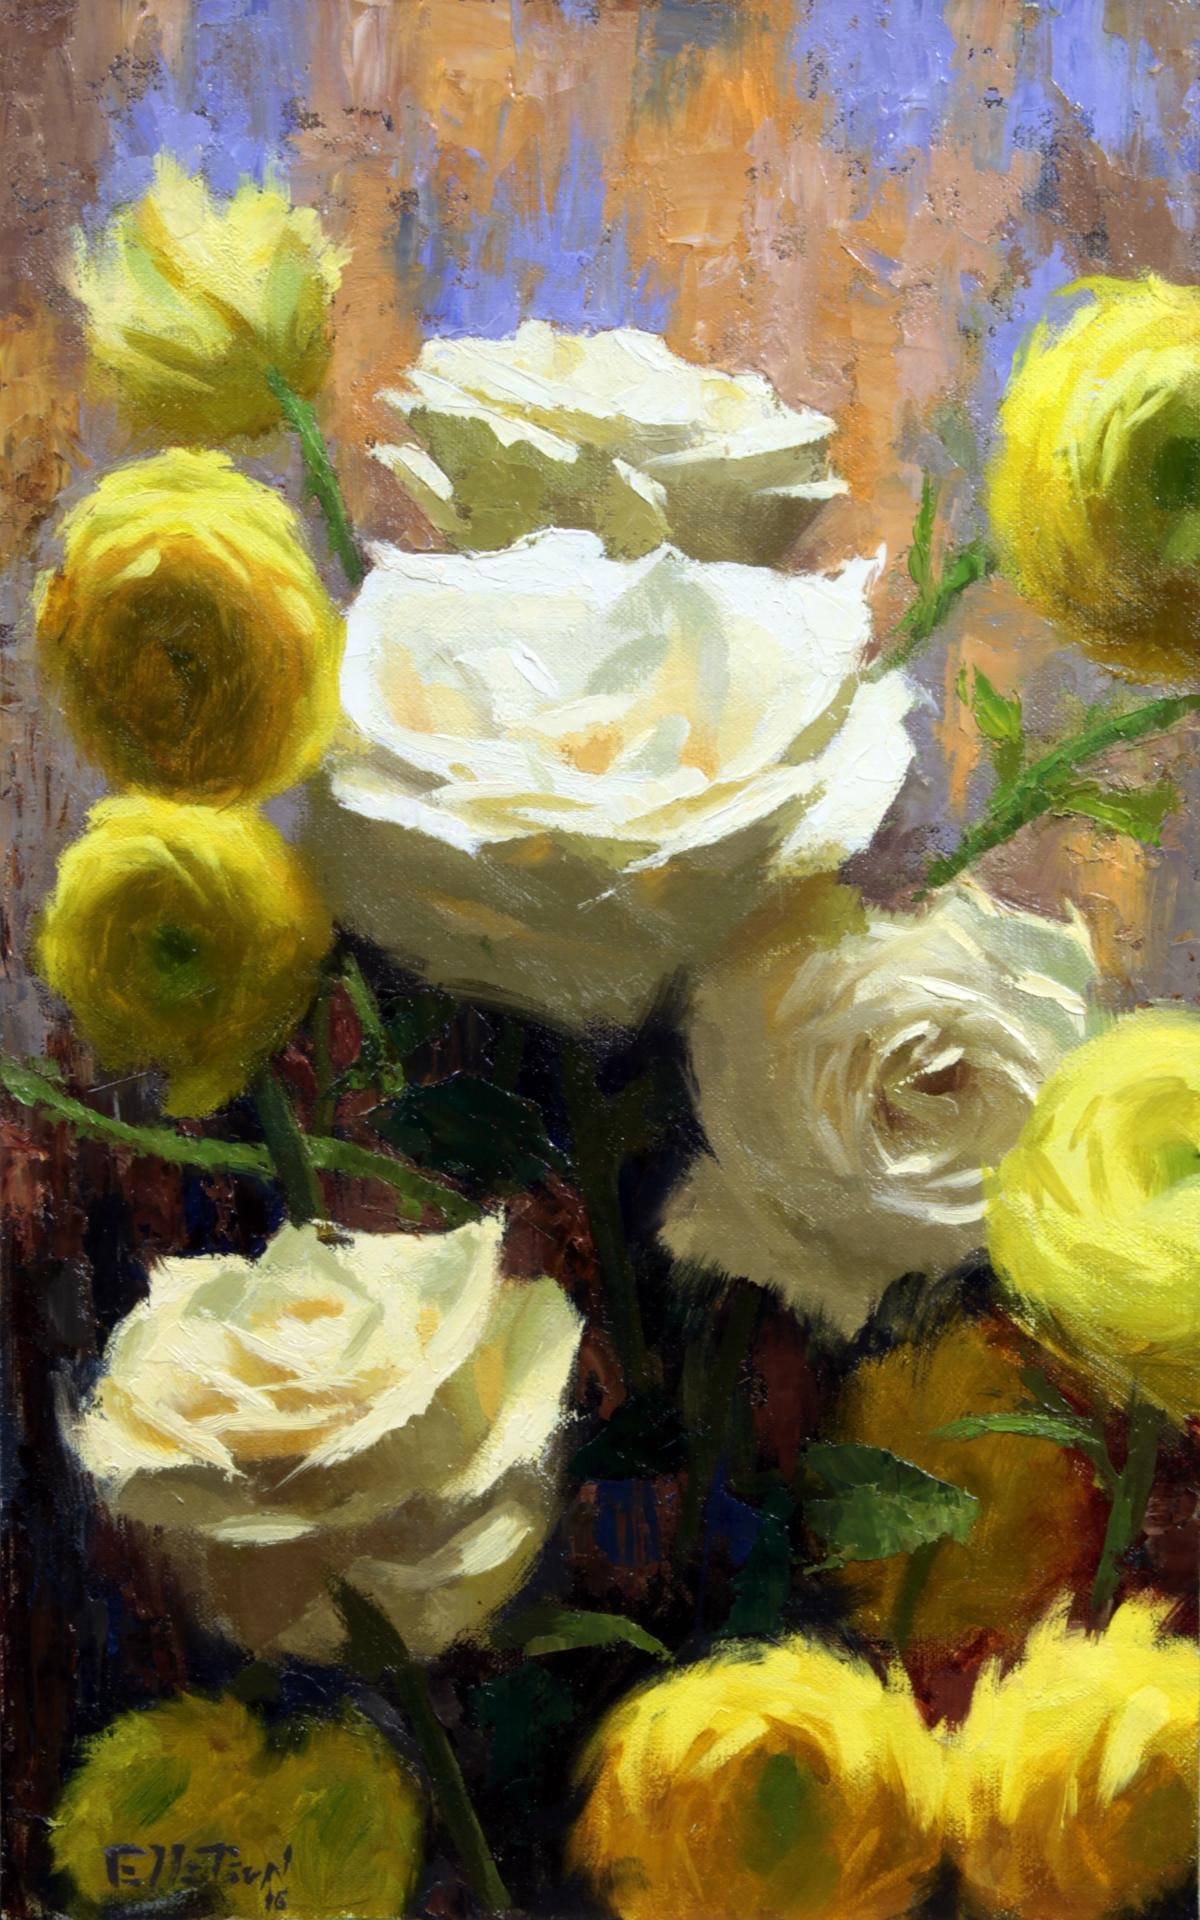 Shower of Light, Floral Painting, Representational Oil Painting, SW ART 